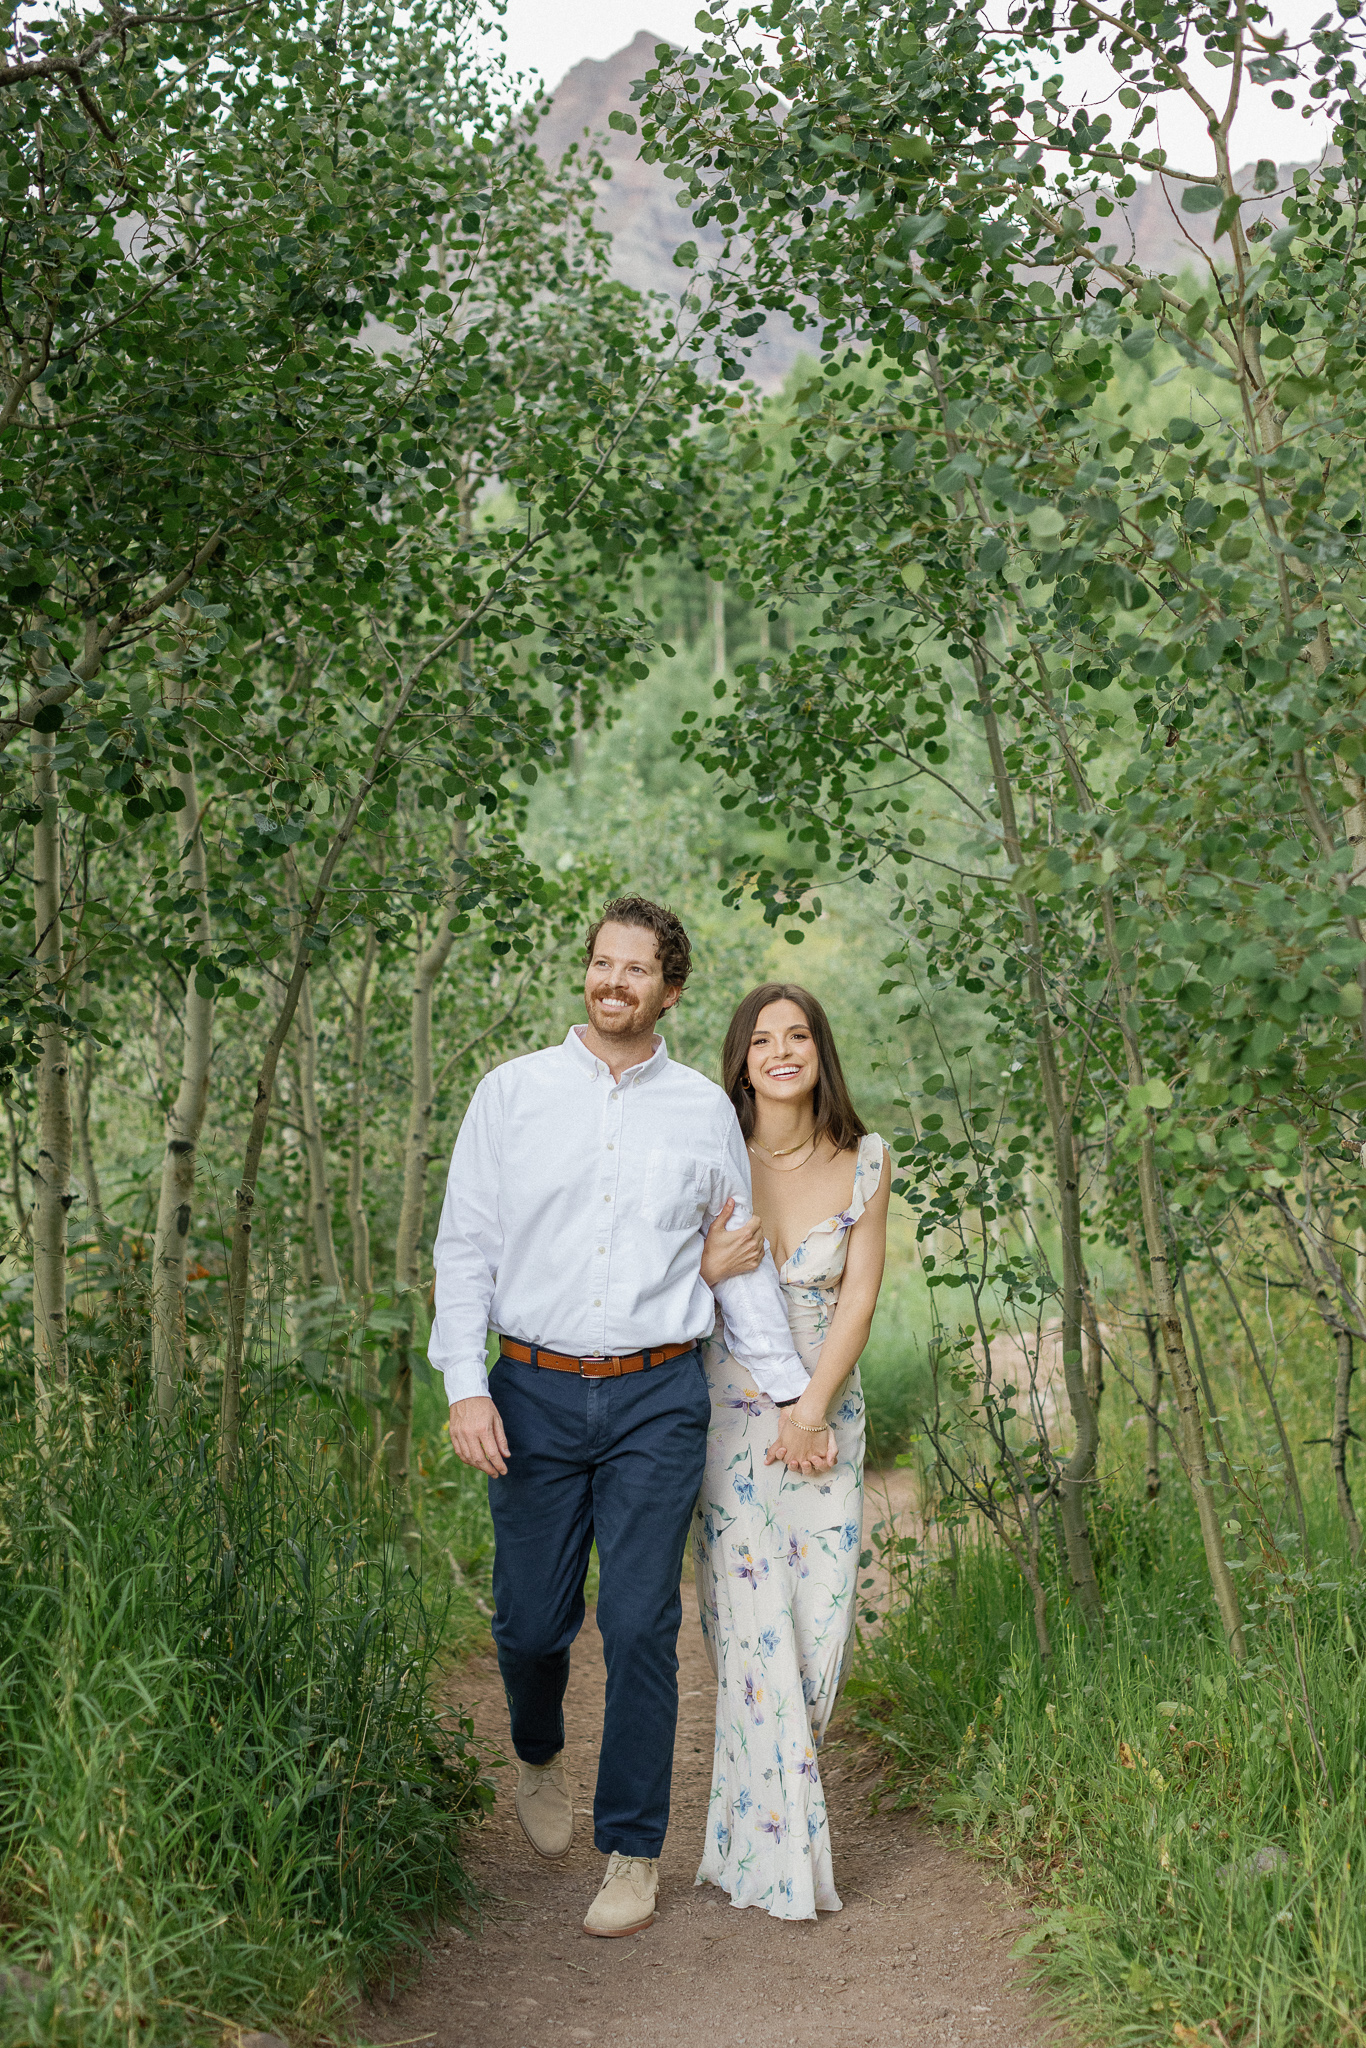 Man in white shirt and navy pants walking with smiling woman in white floral dress in a green aspen grove